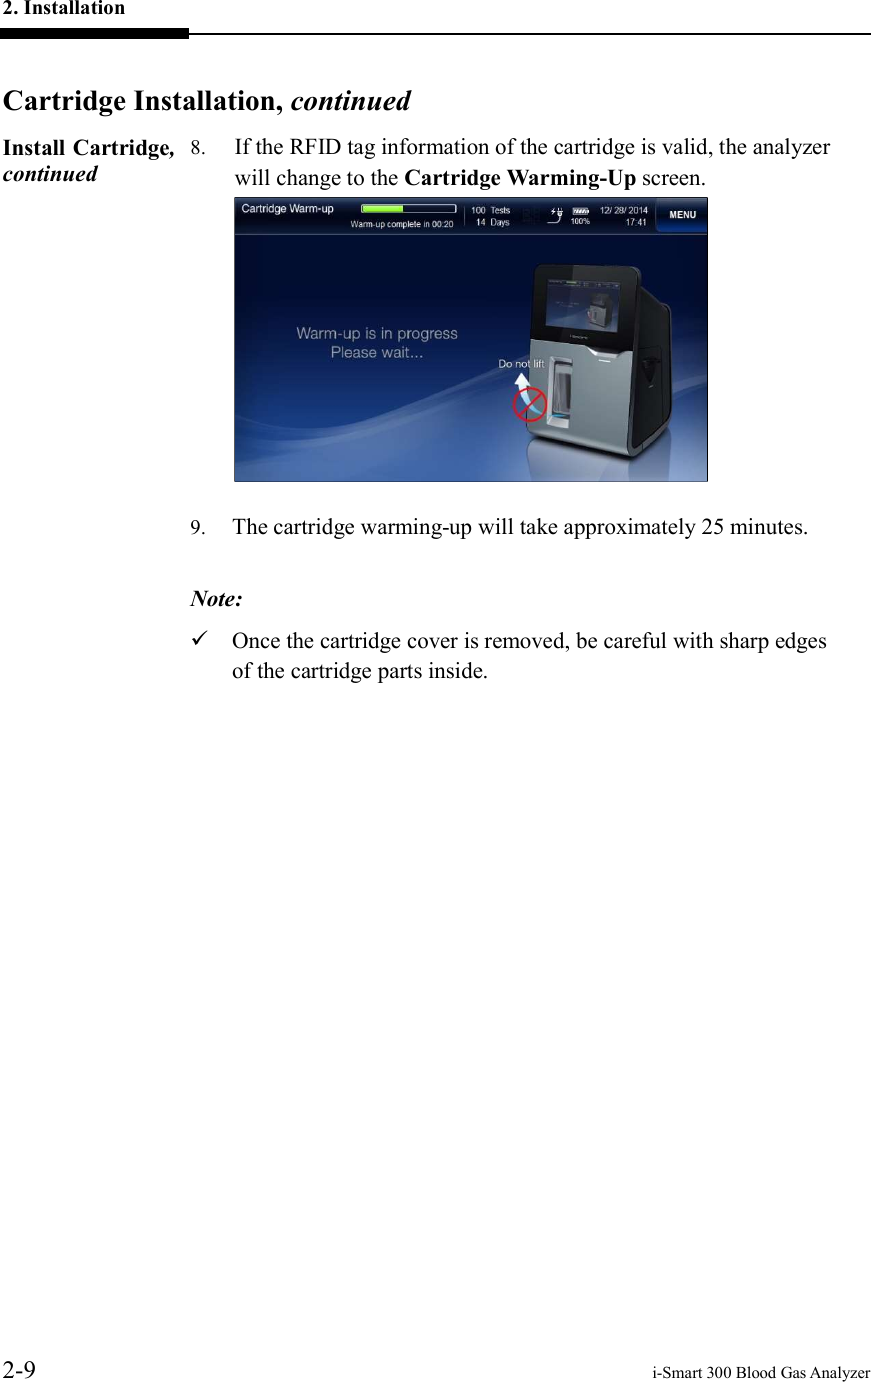 2. Installation     2-9    i-Smart 300 Blood Gas Analyzer  Cartridge Installation, continuedInstall Cartridge, continued 8. If the RFID tag information of the cartridge is valid, the analyzer will change to the Cartridge Warming-Up screen.  9. The cartridge warming-up will take approximately 25 minutes.  Note:  Once the cartridge cover is removed, be careful with sharp edges of the cartridge parts inside.    